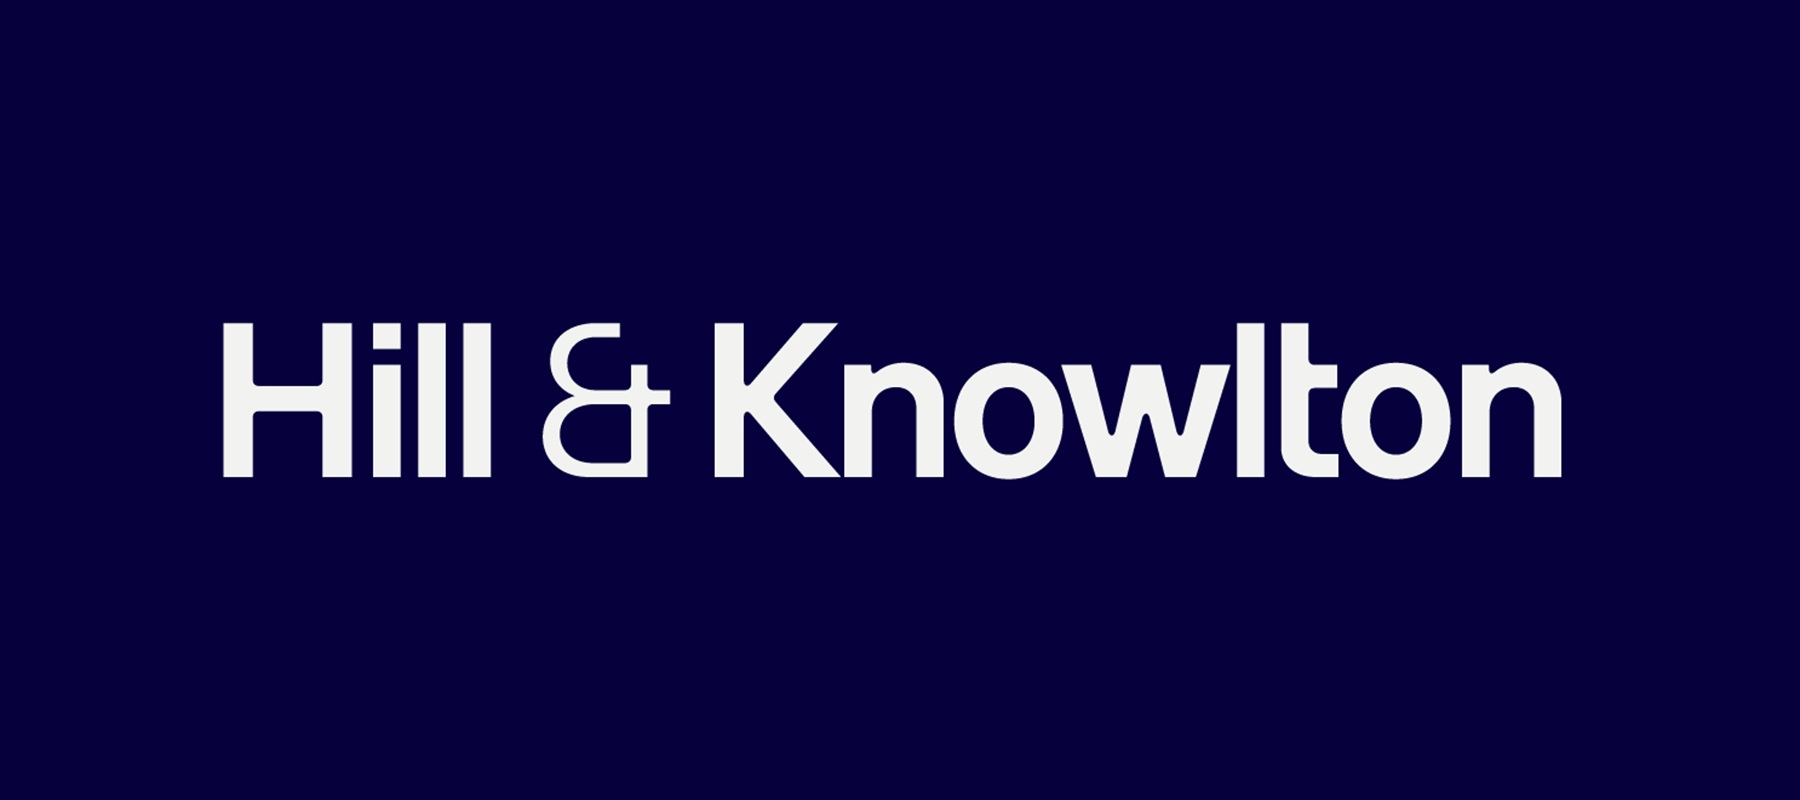 Hill & Knowlton reverts to original name in latest rebrand